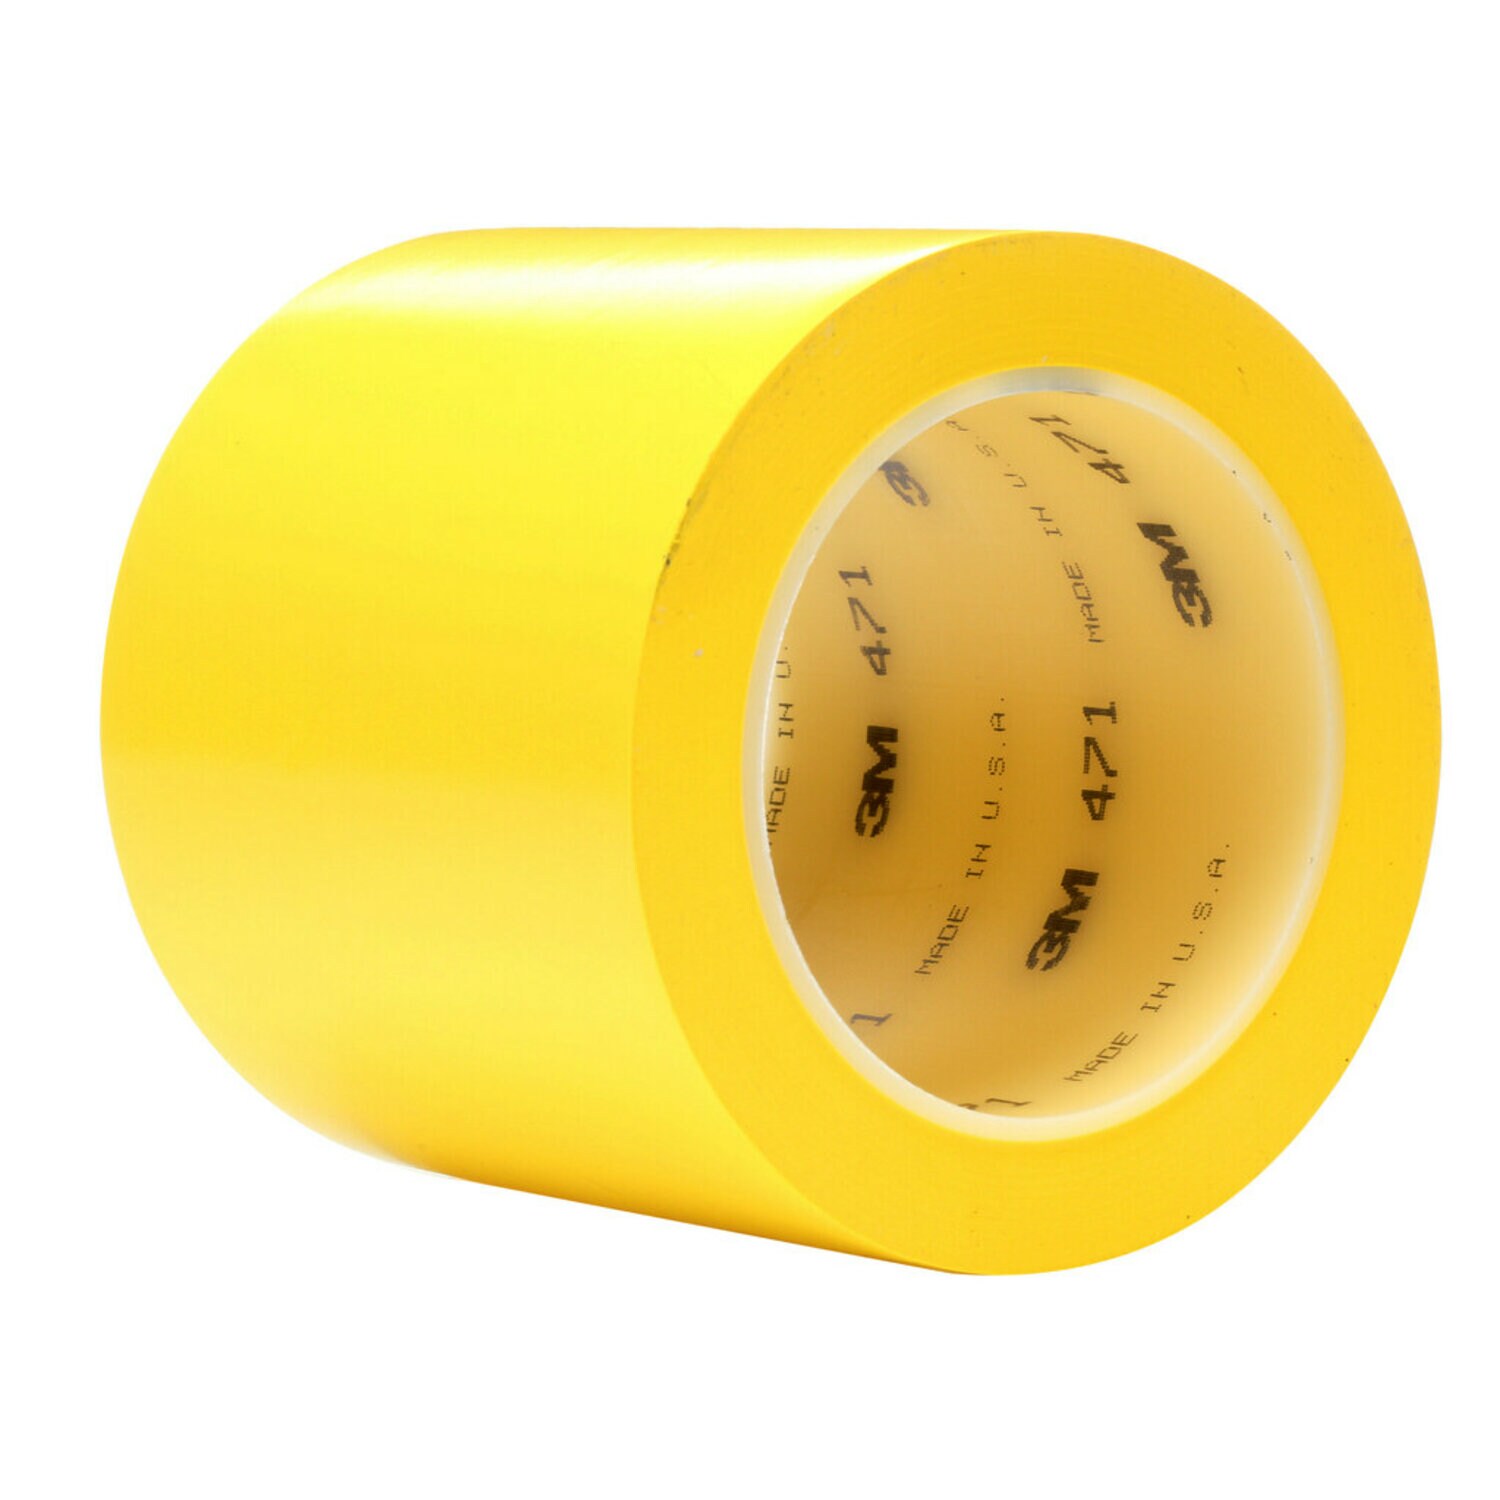 7010335141 - 3M Vinyl Tape 471, Yellow, 4 in x 36 yd, 5.2 mil, 8 rolls per case,
Individually Wrapped Conveniently Packaged